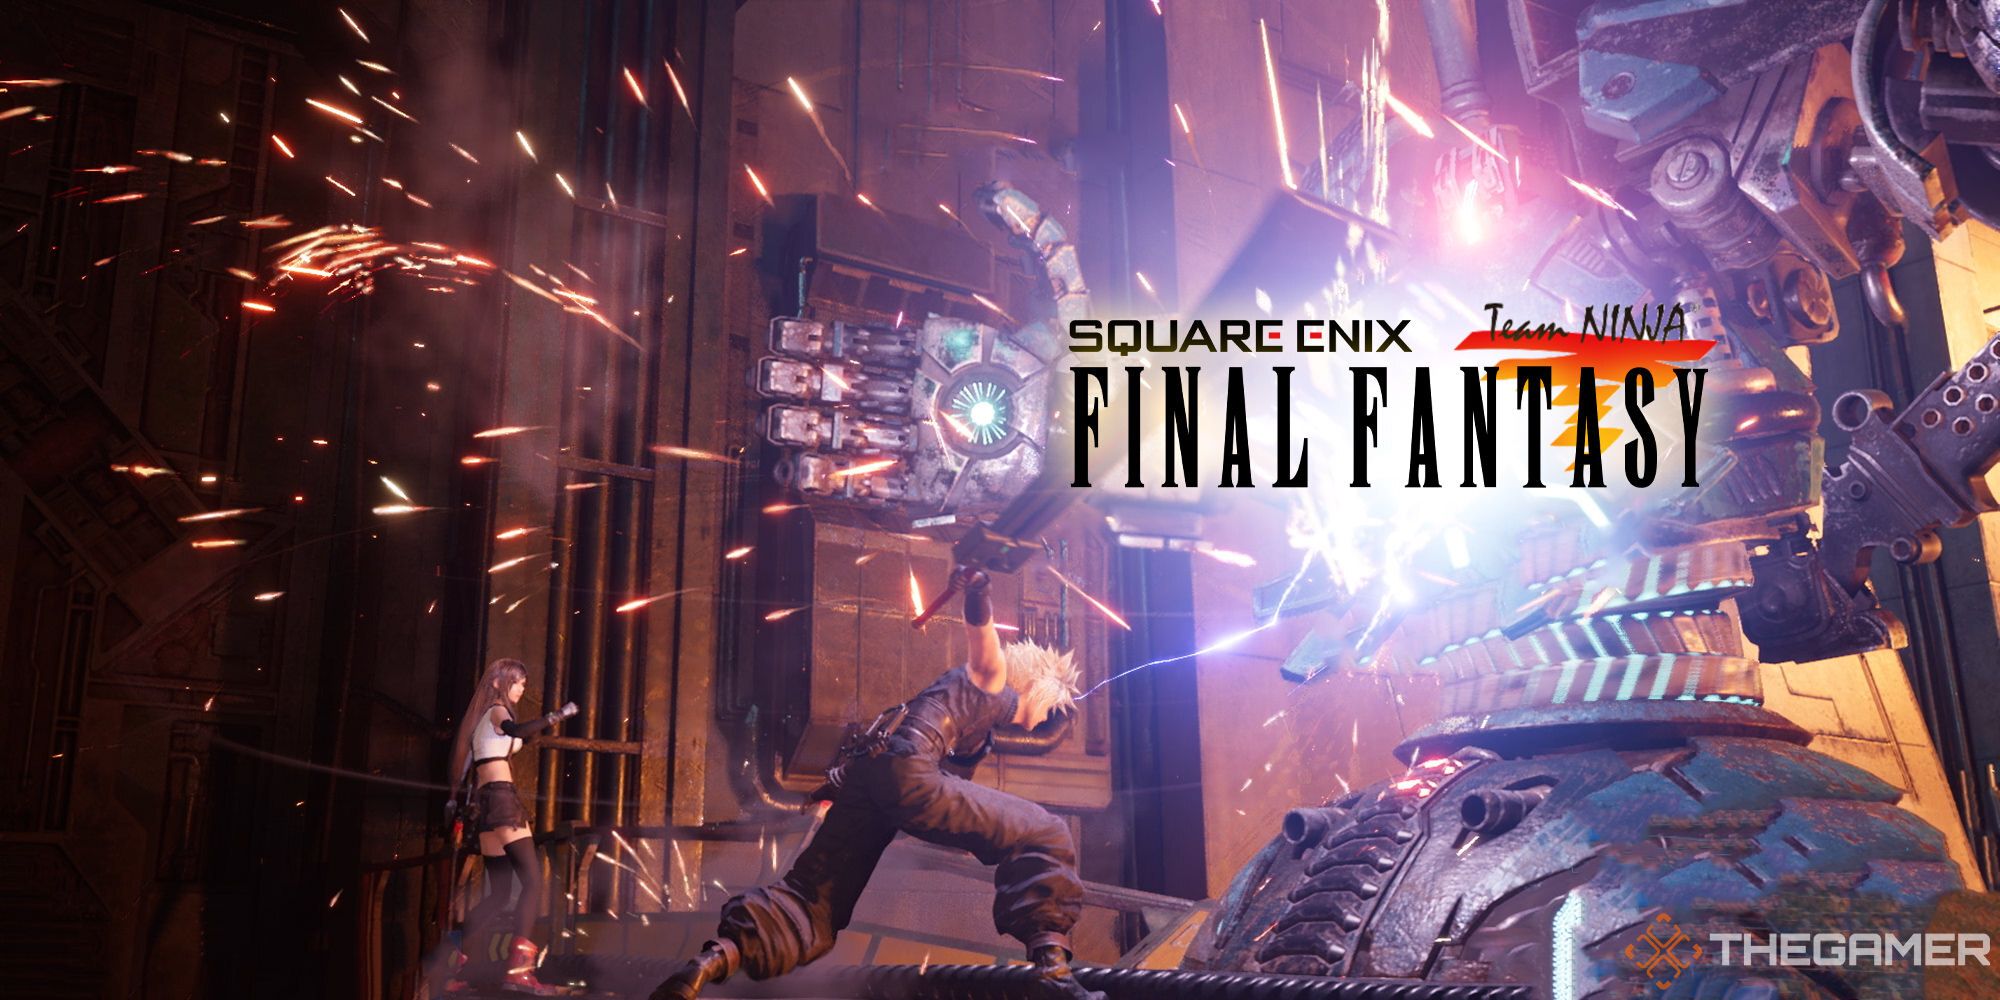 Square Enix Is About To Announce A Final Fantasy Spinoff Says New Rumor